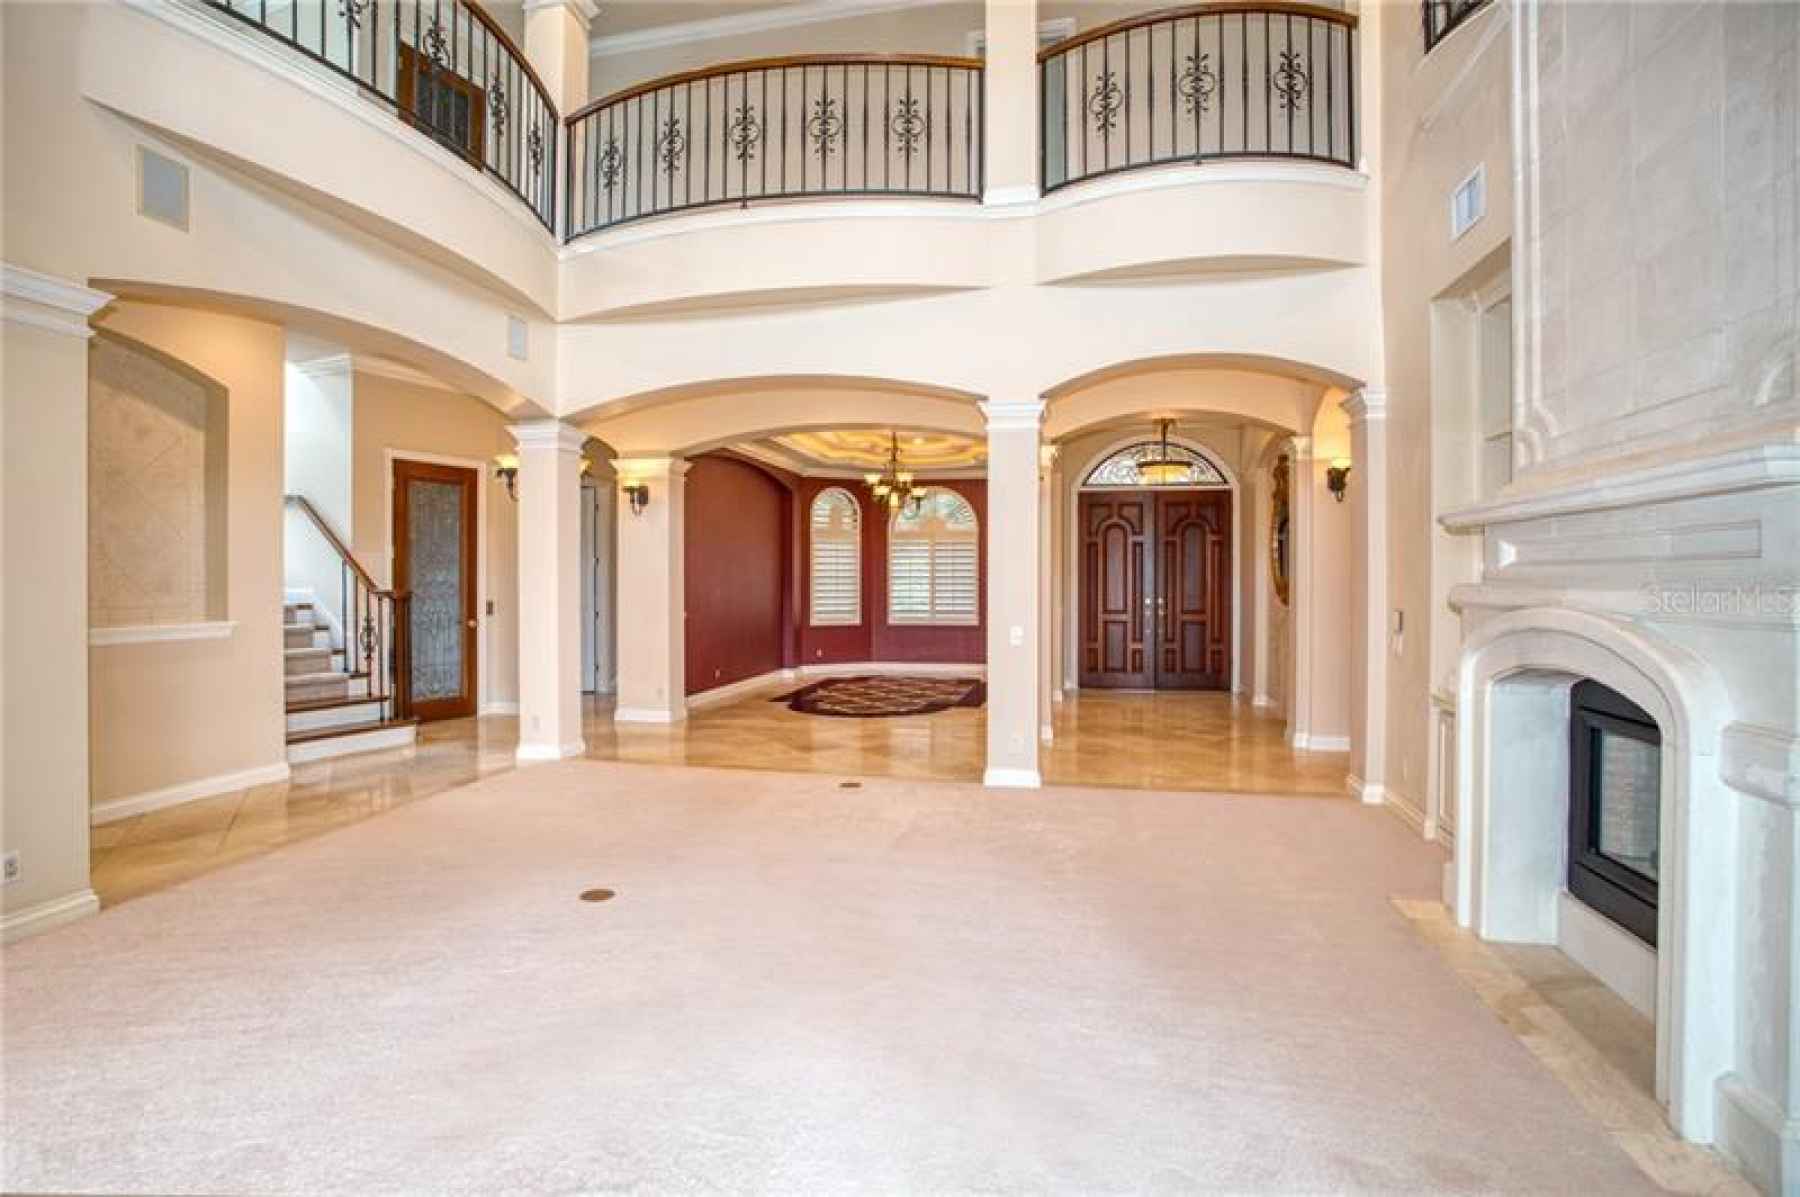 Formal two story living room